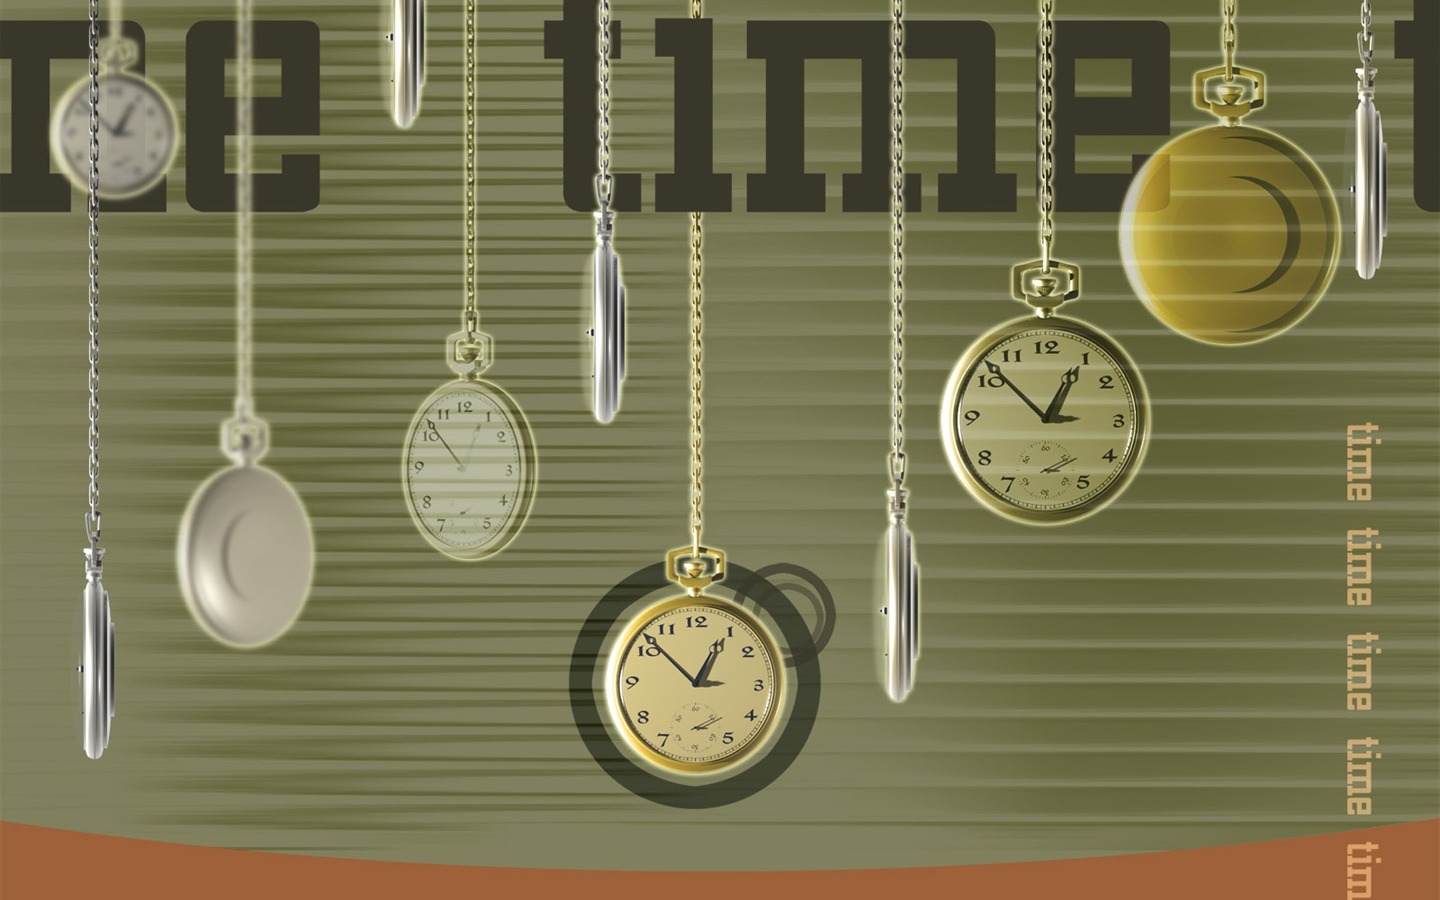 Clock and Time HD Wallpapers #2 - 1440x900